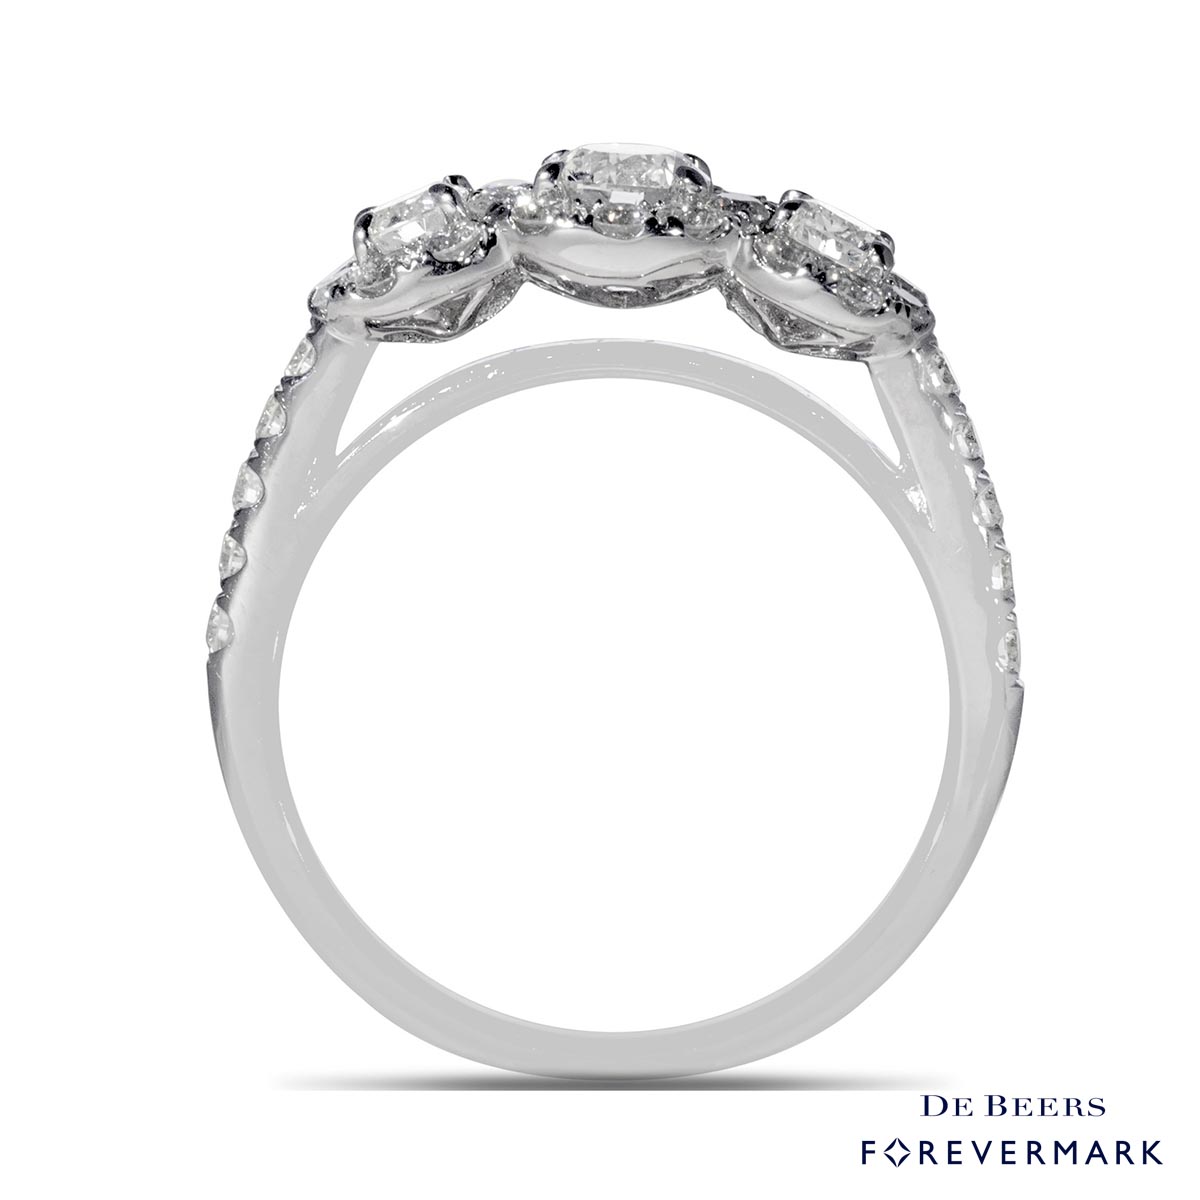 De Beers Forevermark Center of My Universe Diamond Three Stone Halo Ring in 18kt White Gold (1 1/7ct tw)